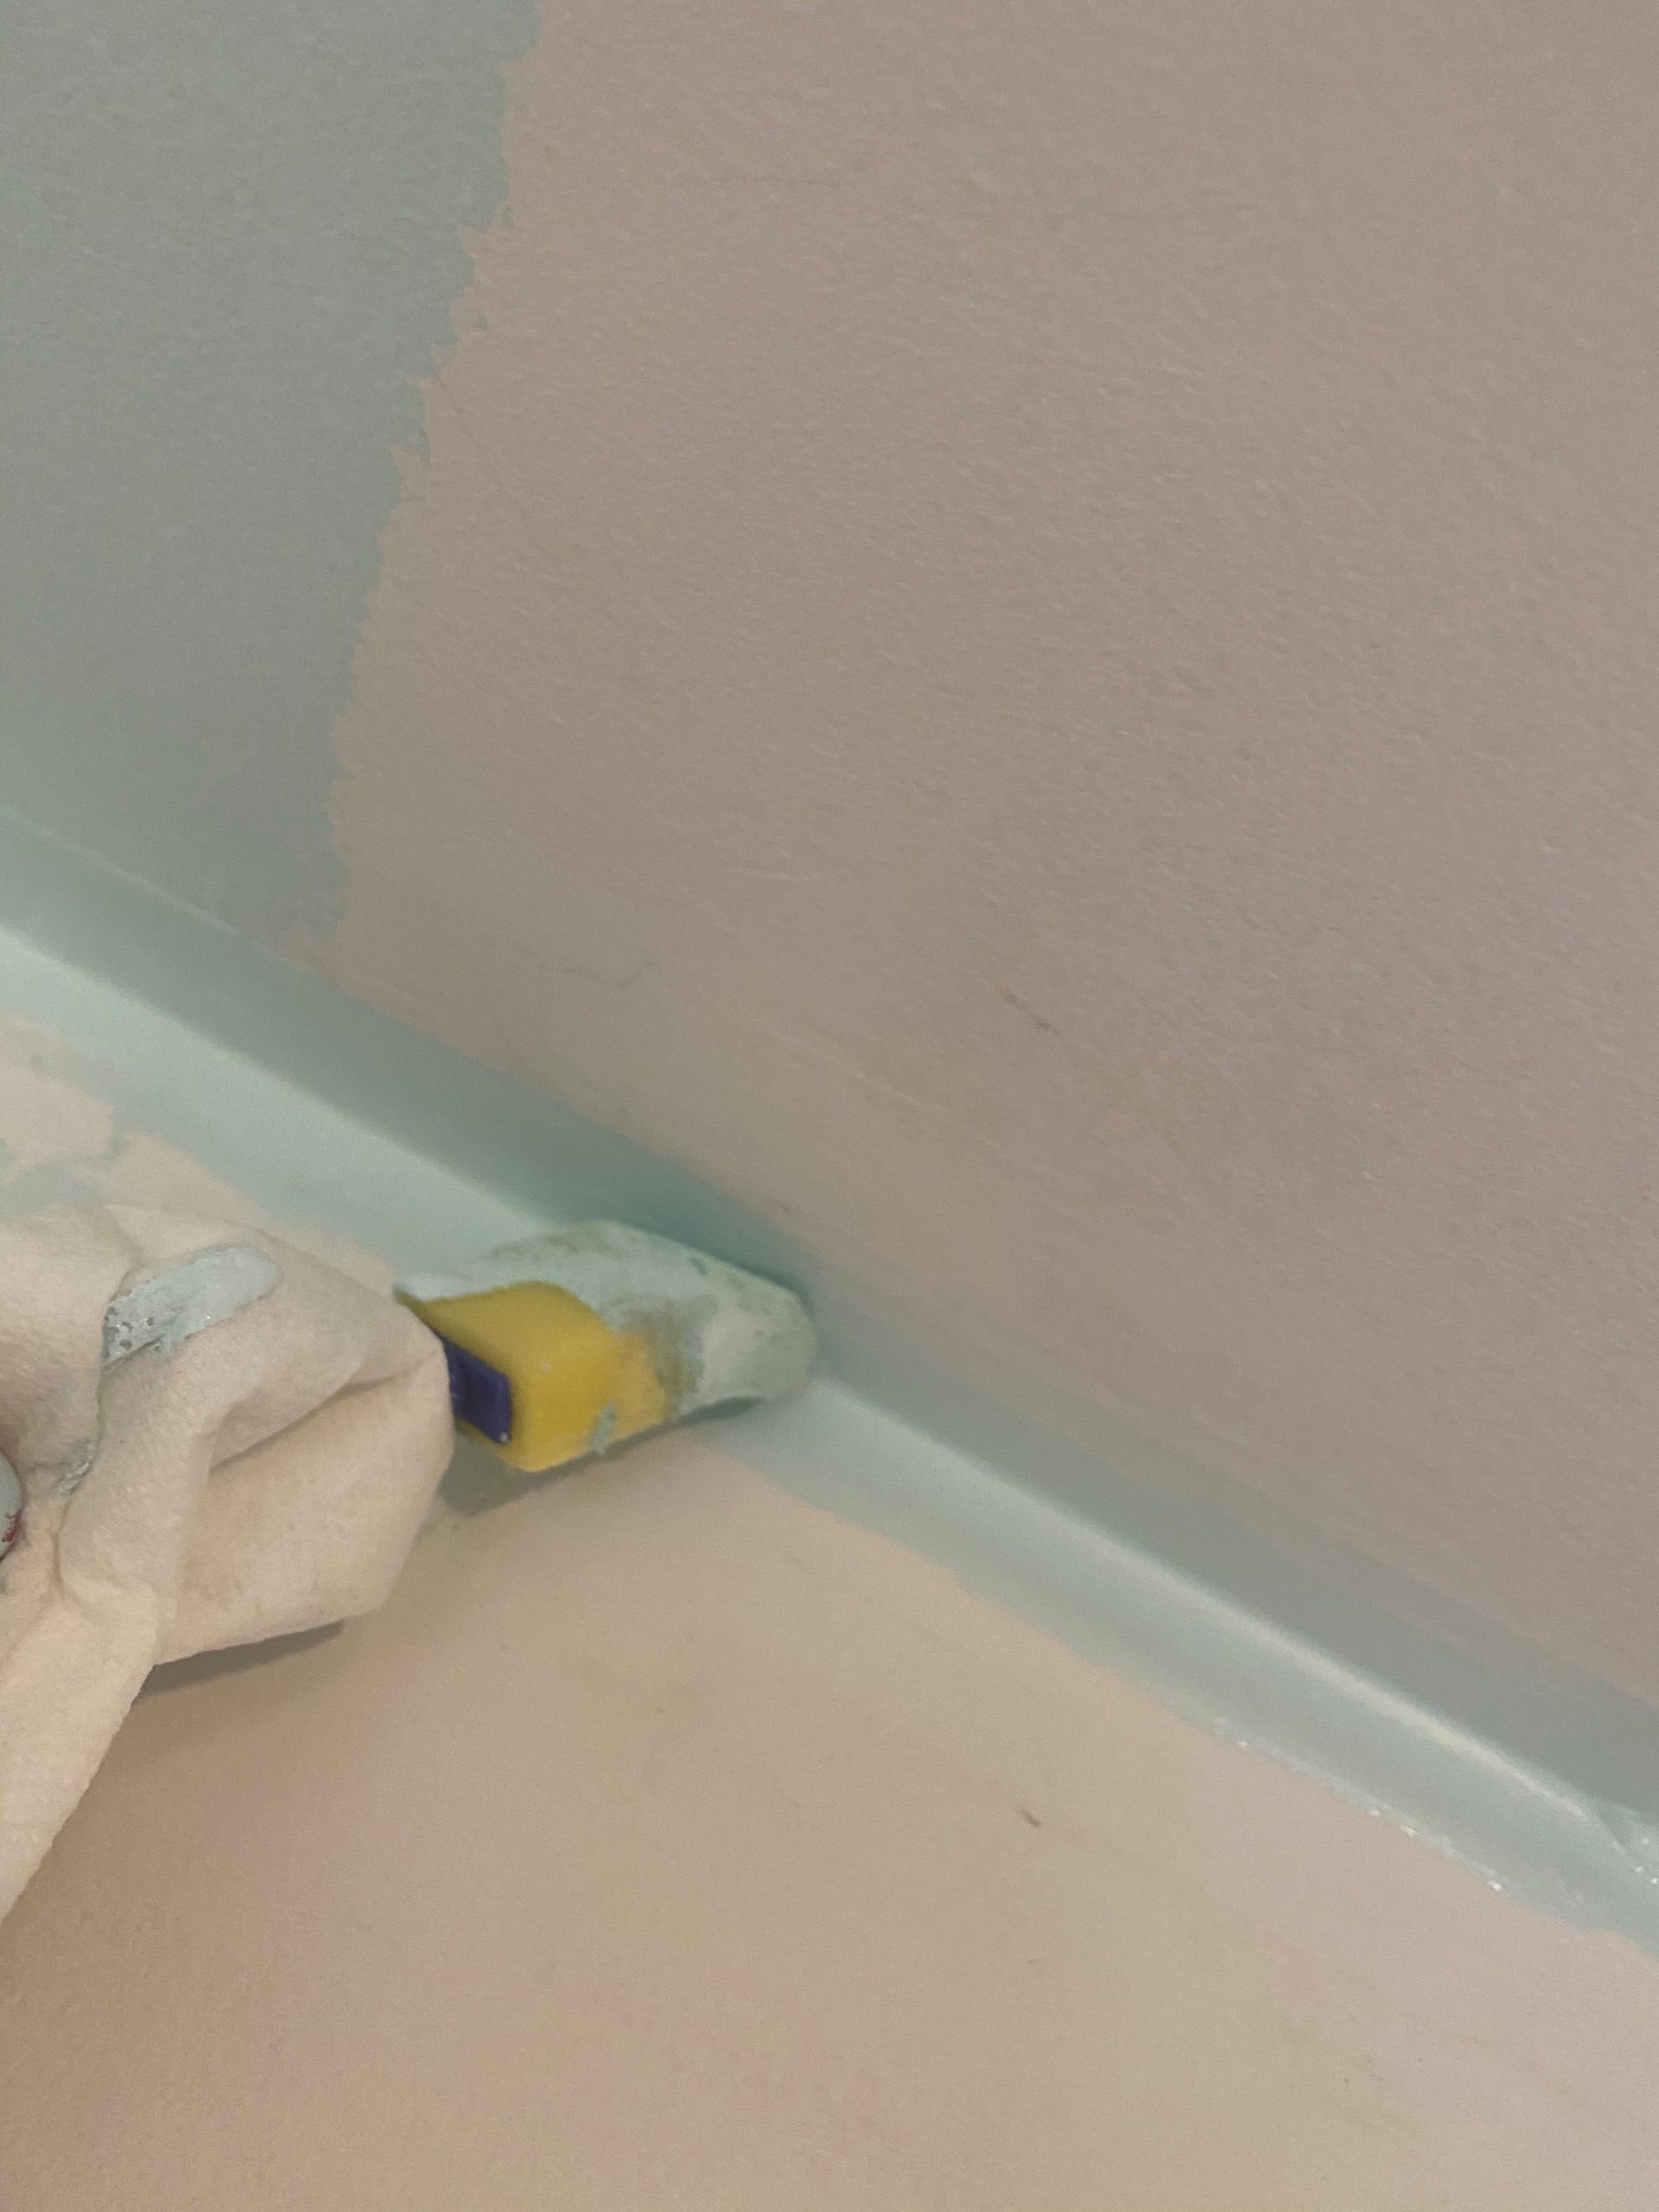 Painting the room